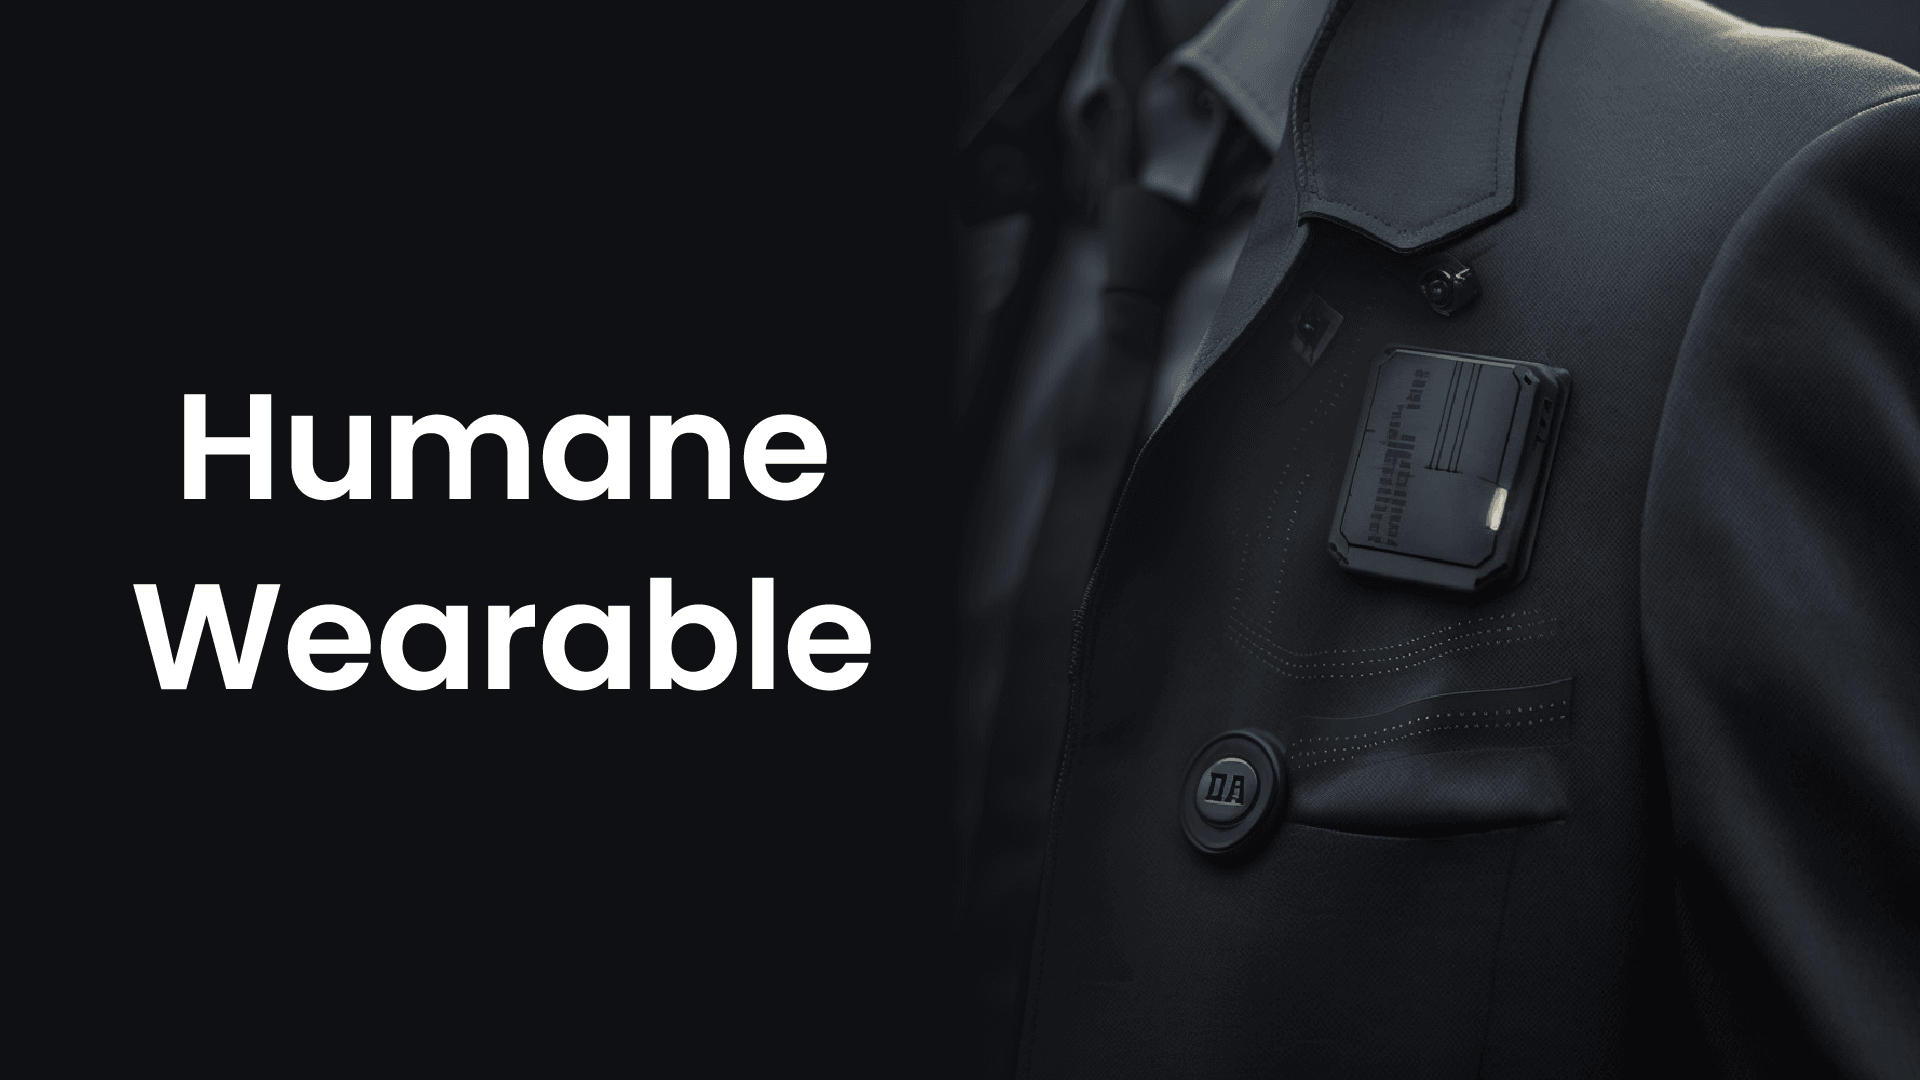 Humane Wearable: A Screenless Device for a Better User Experience